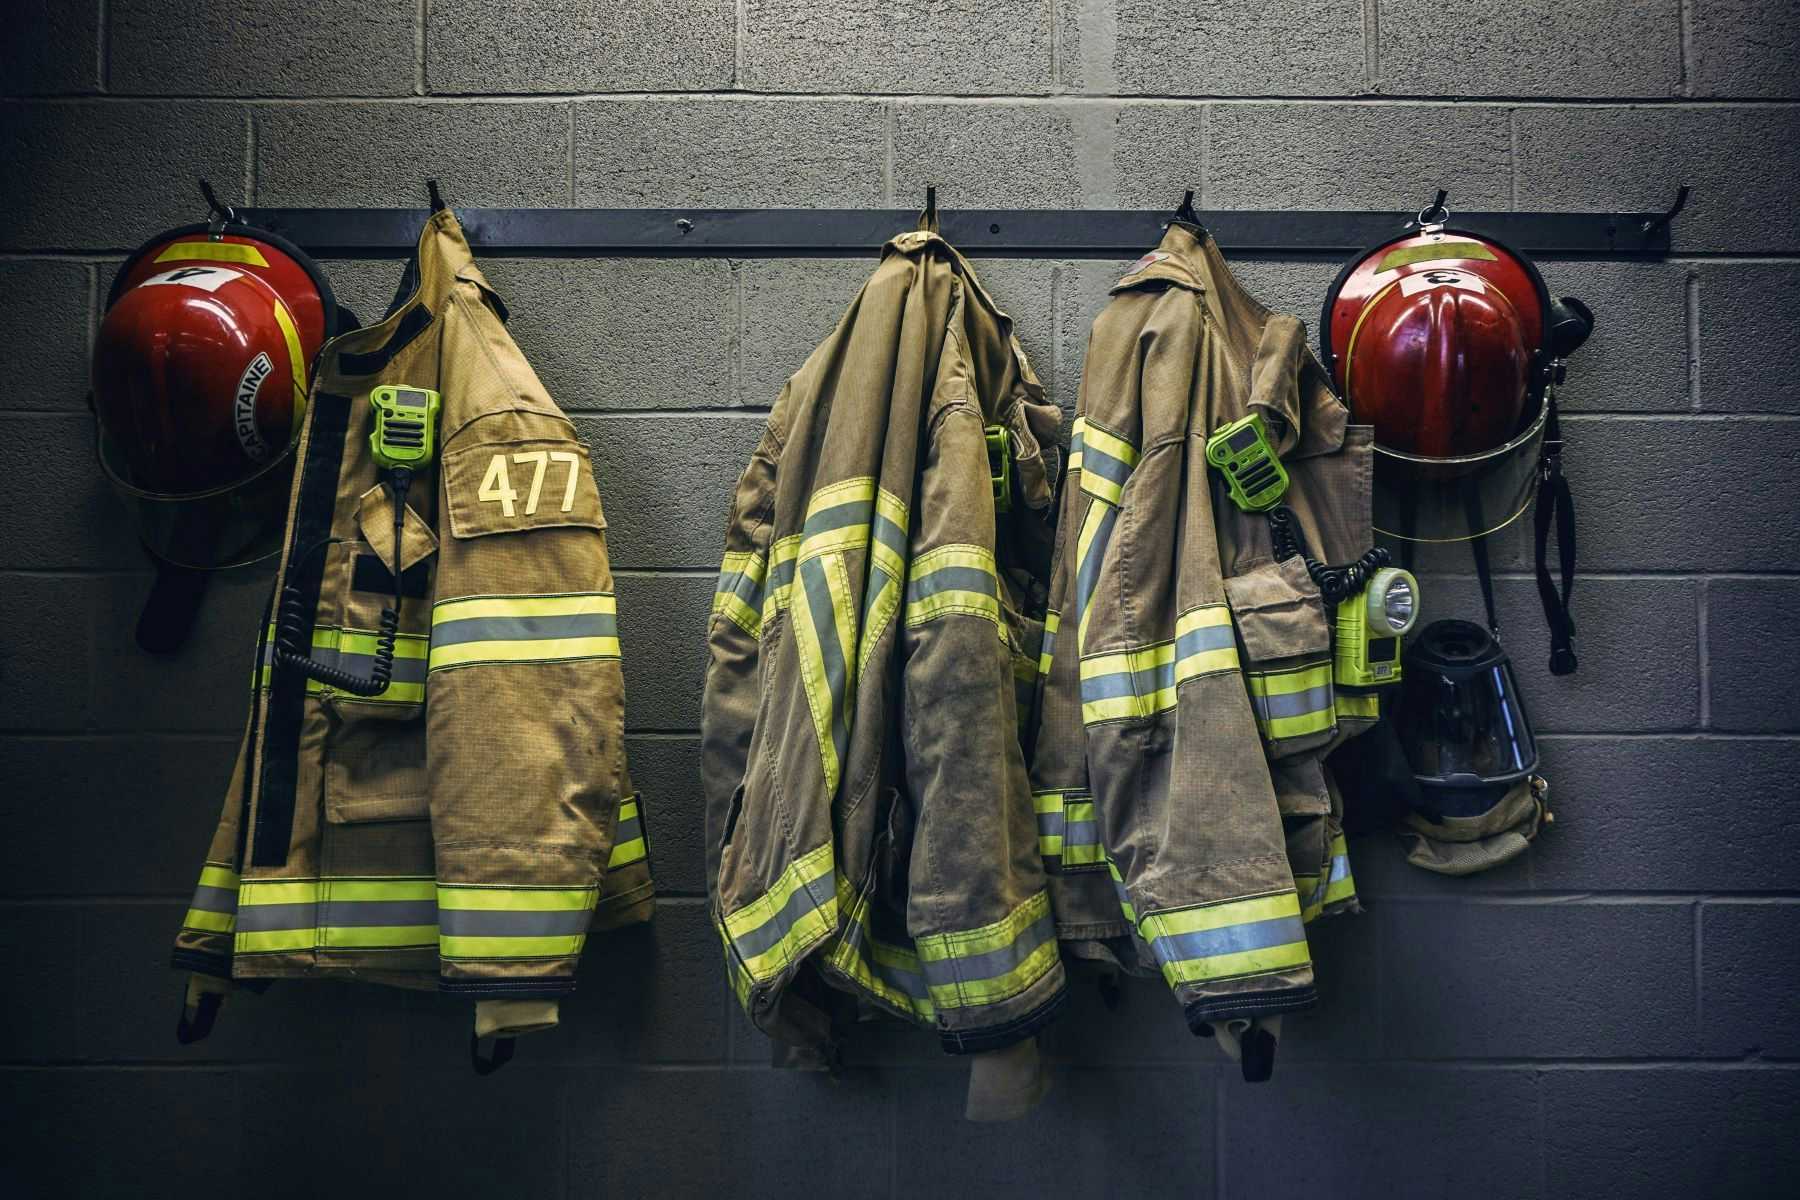 Firefighter jackets and helmets hanging